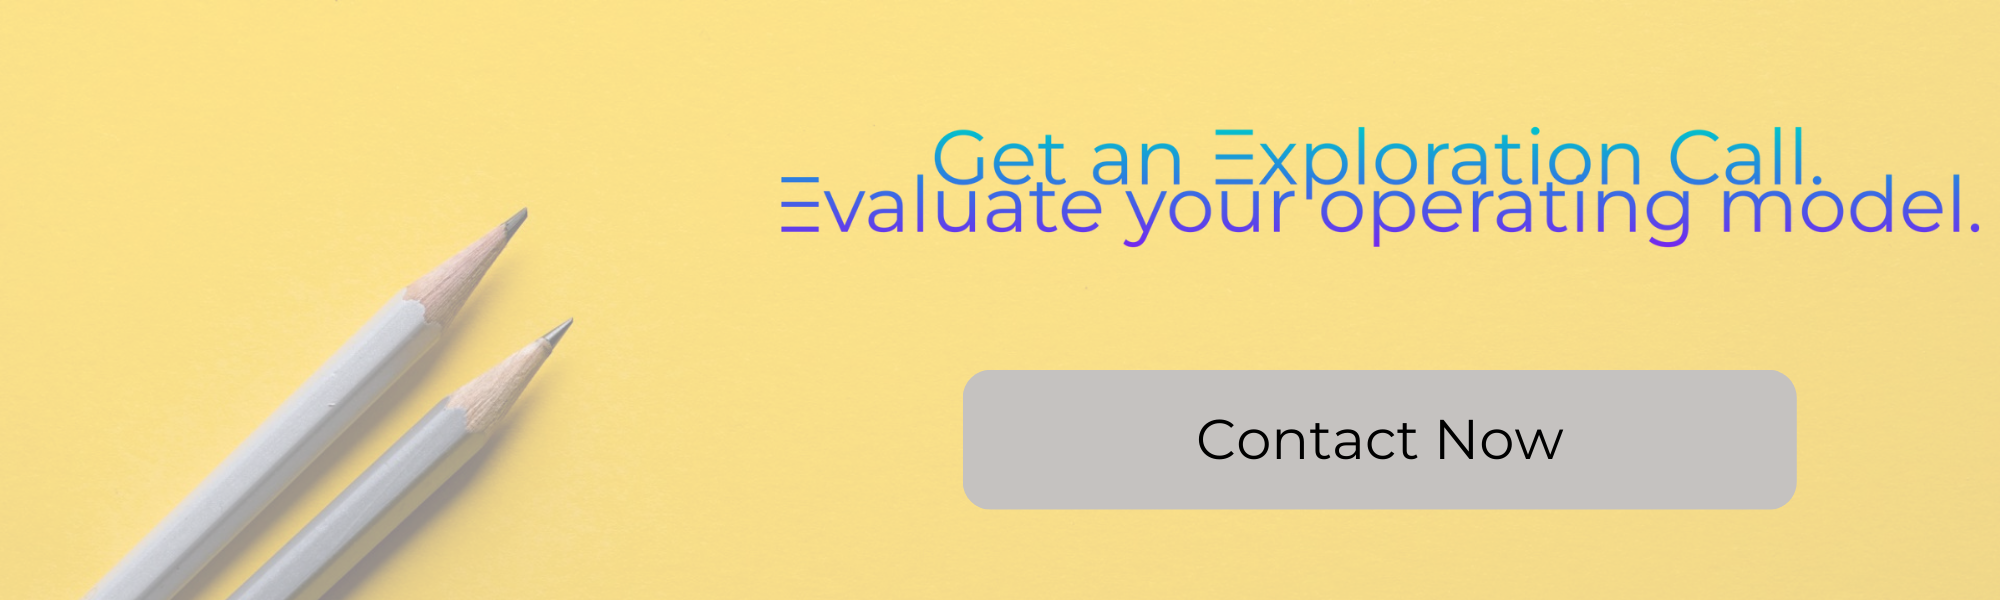 Get an Exploration call with Versatile Consulting